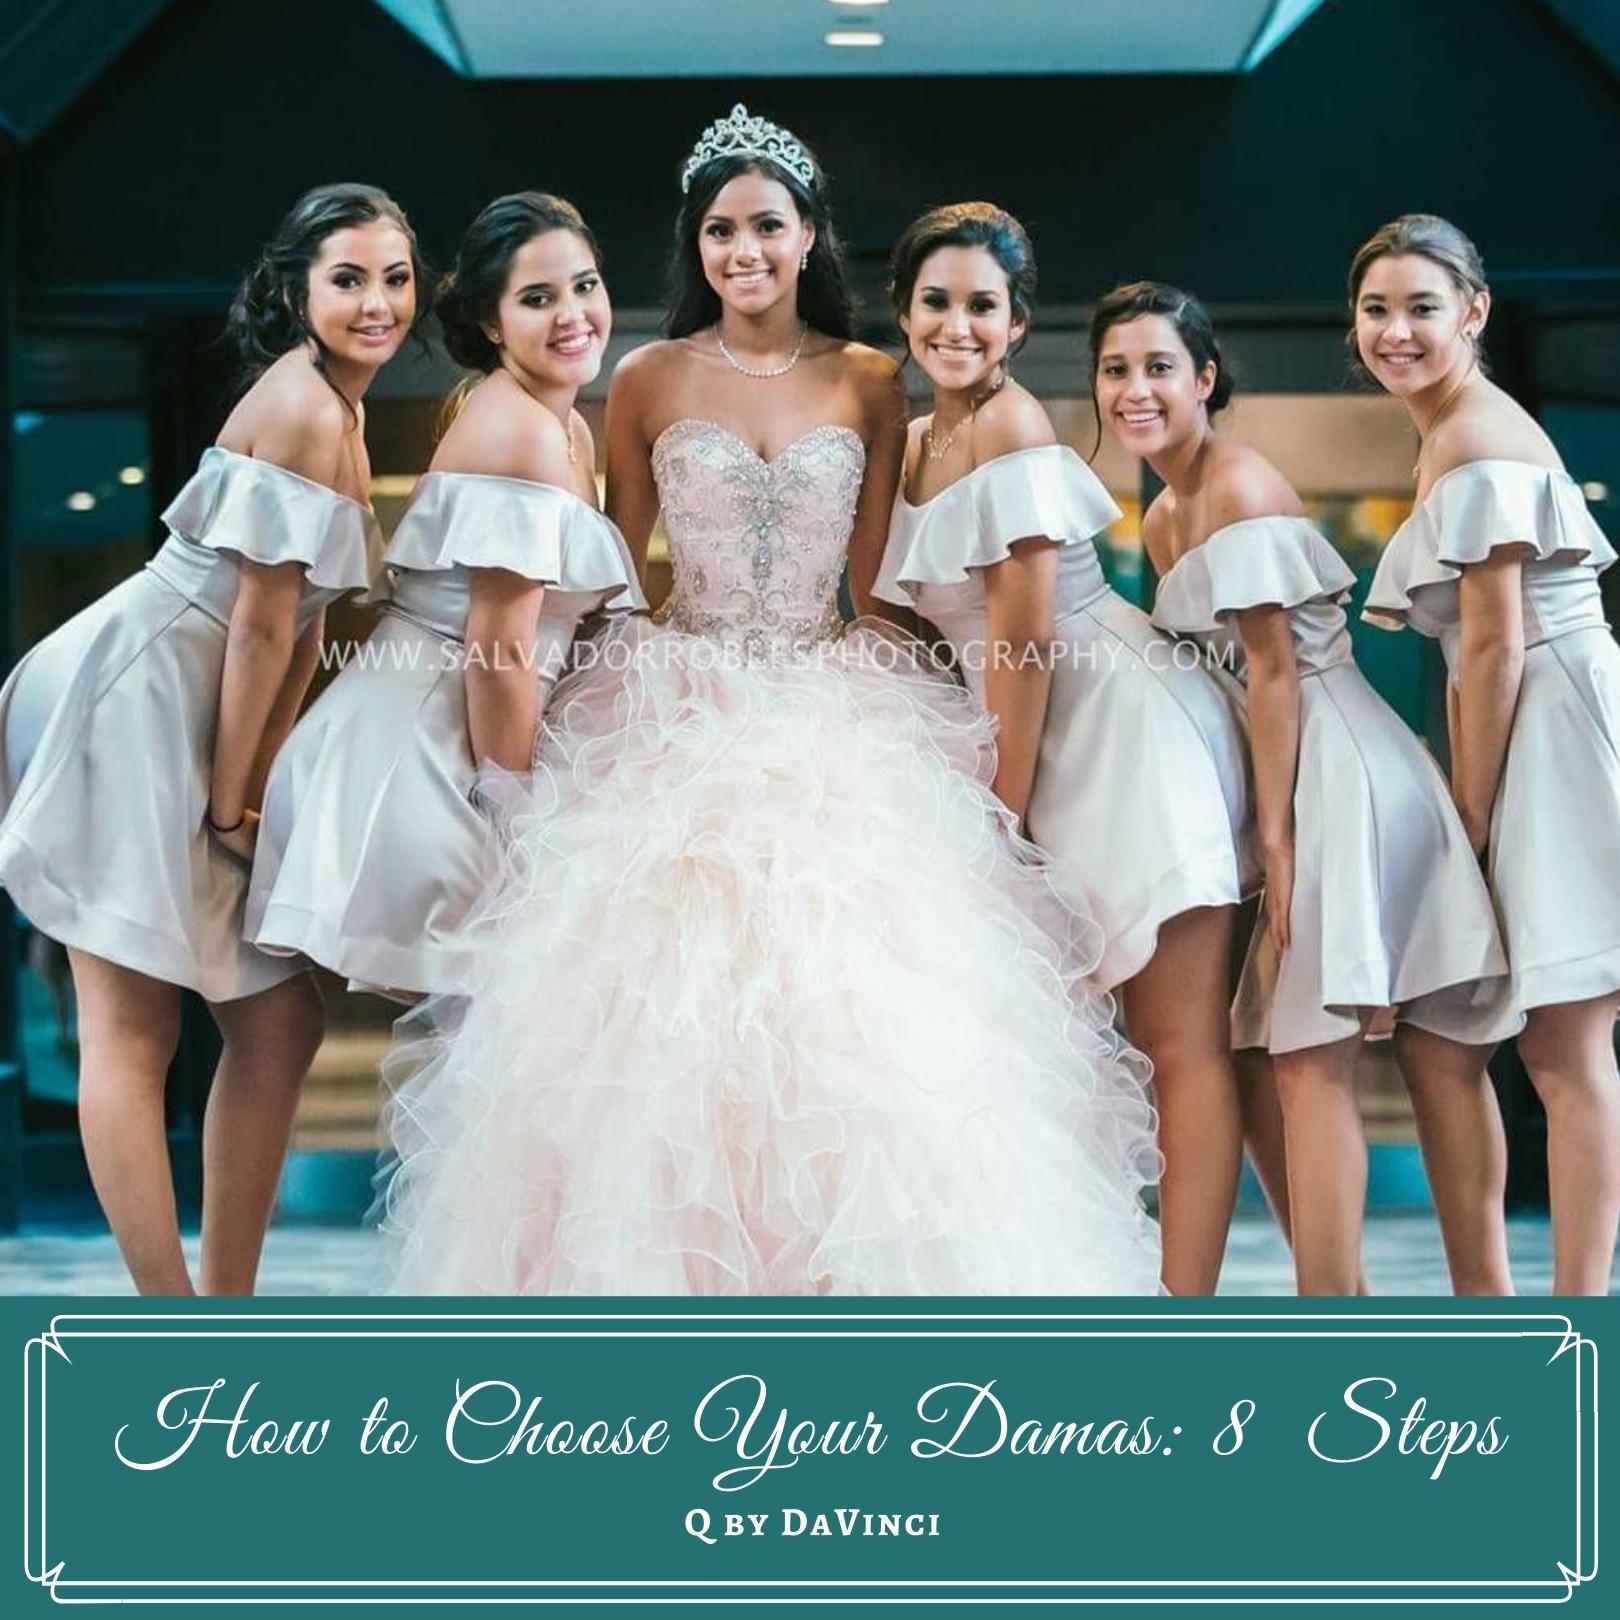 How to Choose Your Damas: 8 Steps